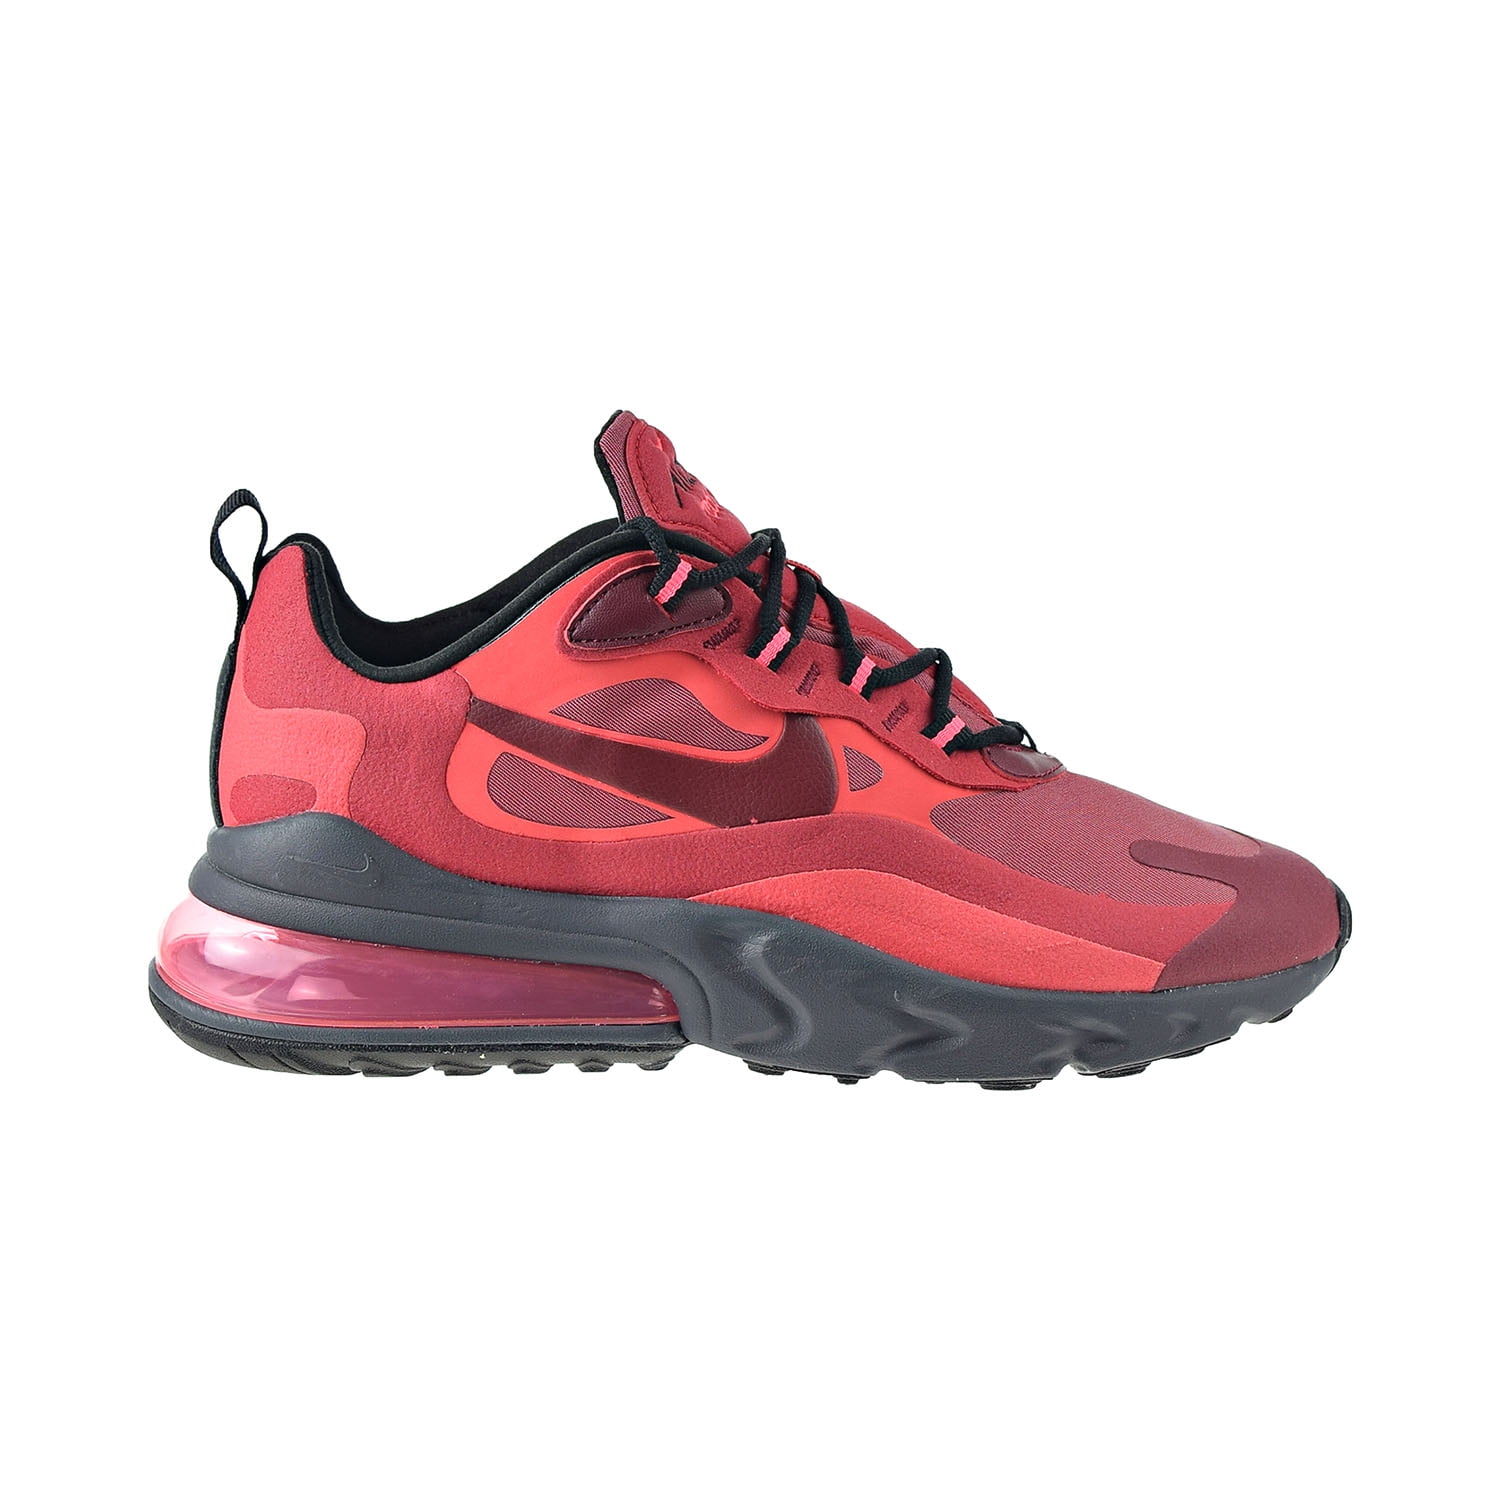 all red 270 air max